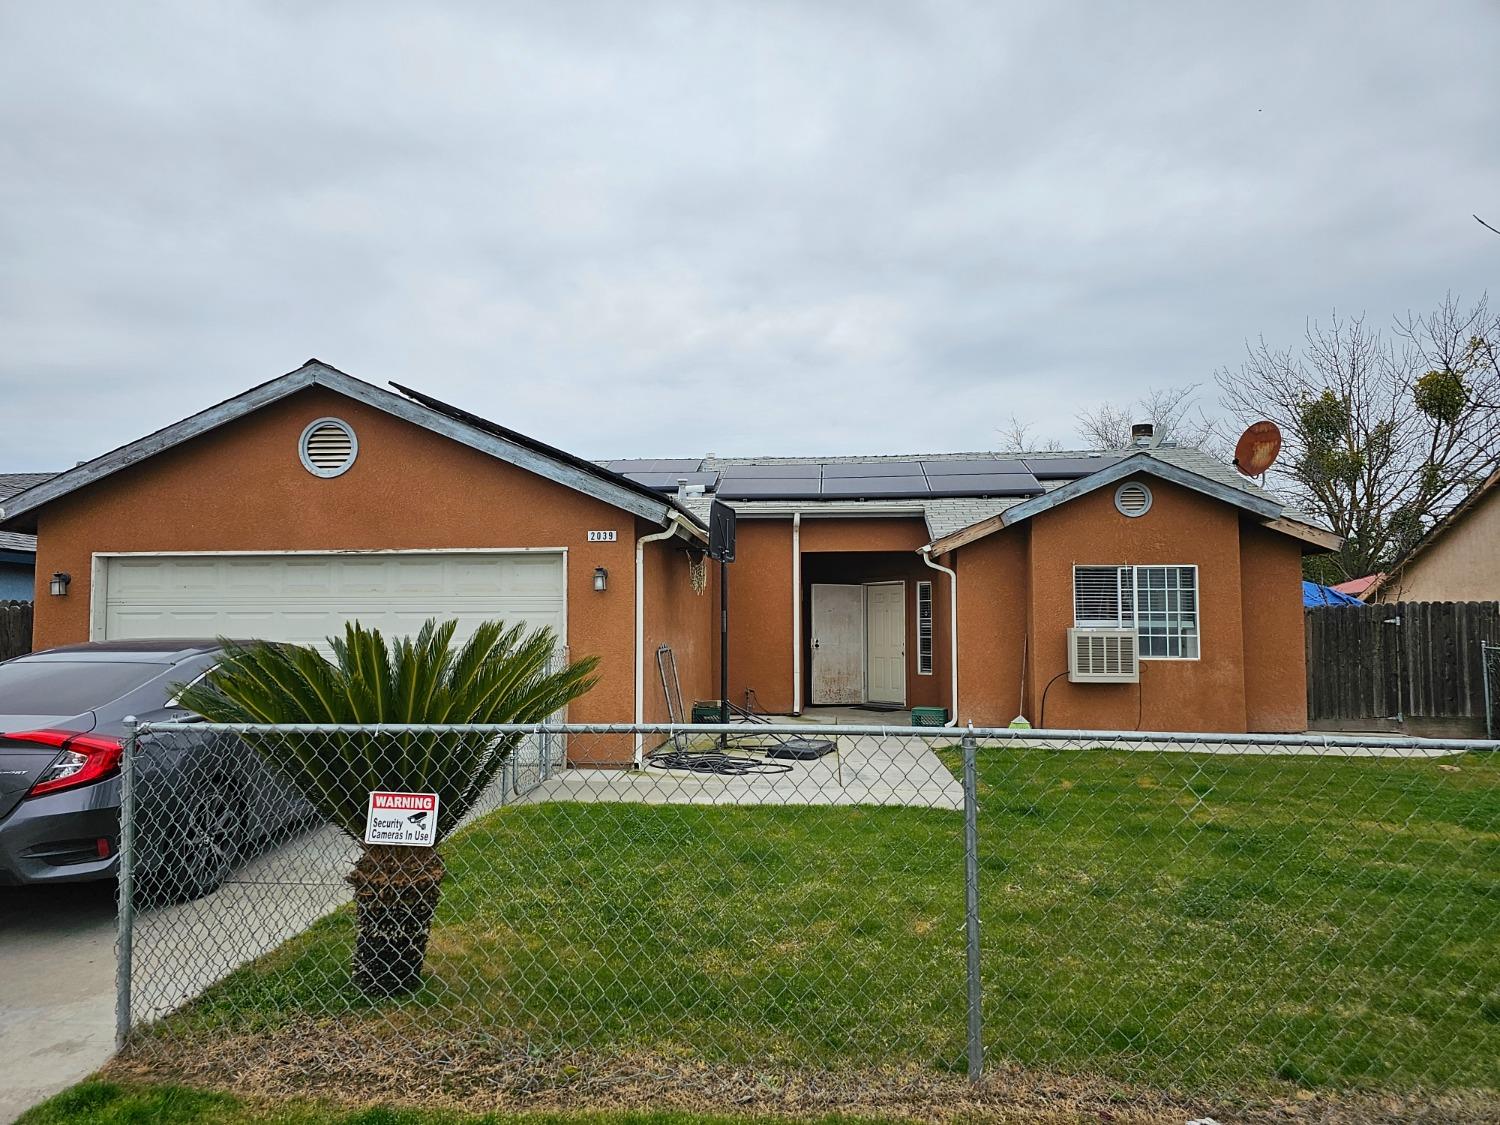 Photo of 2039 Thompson Ave in Selma, CA